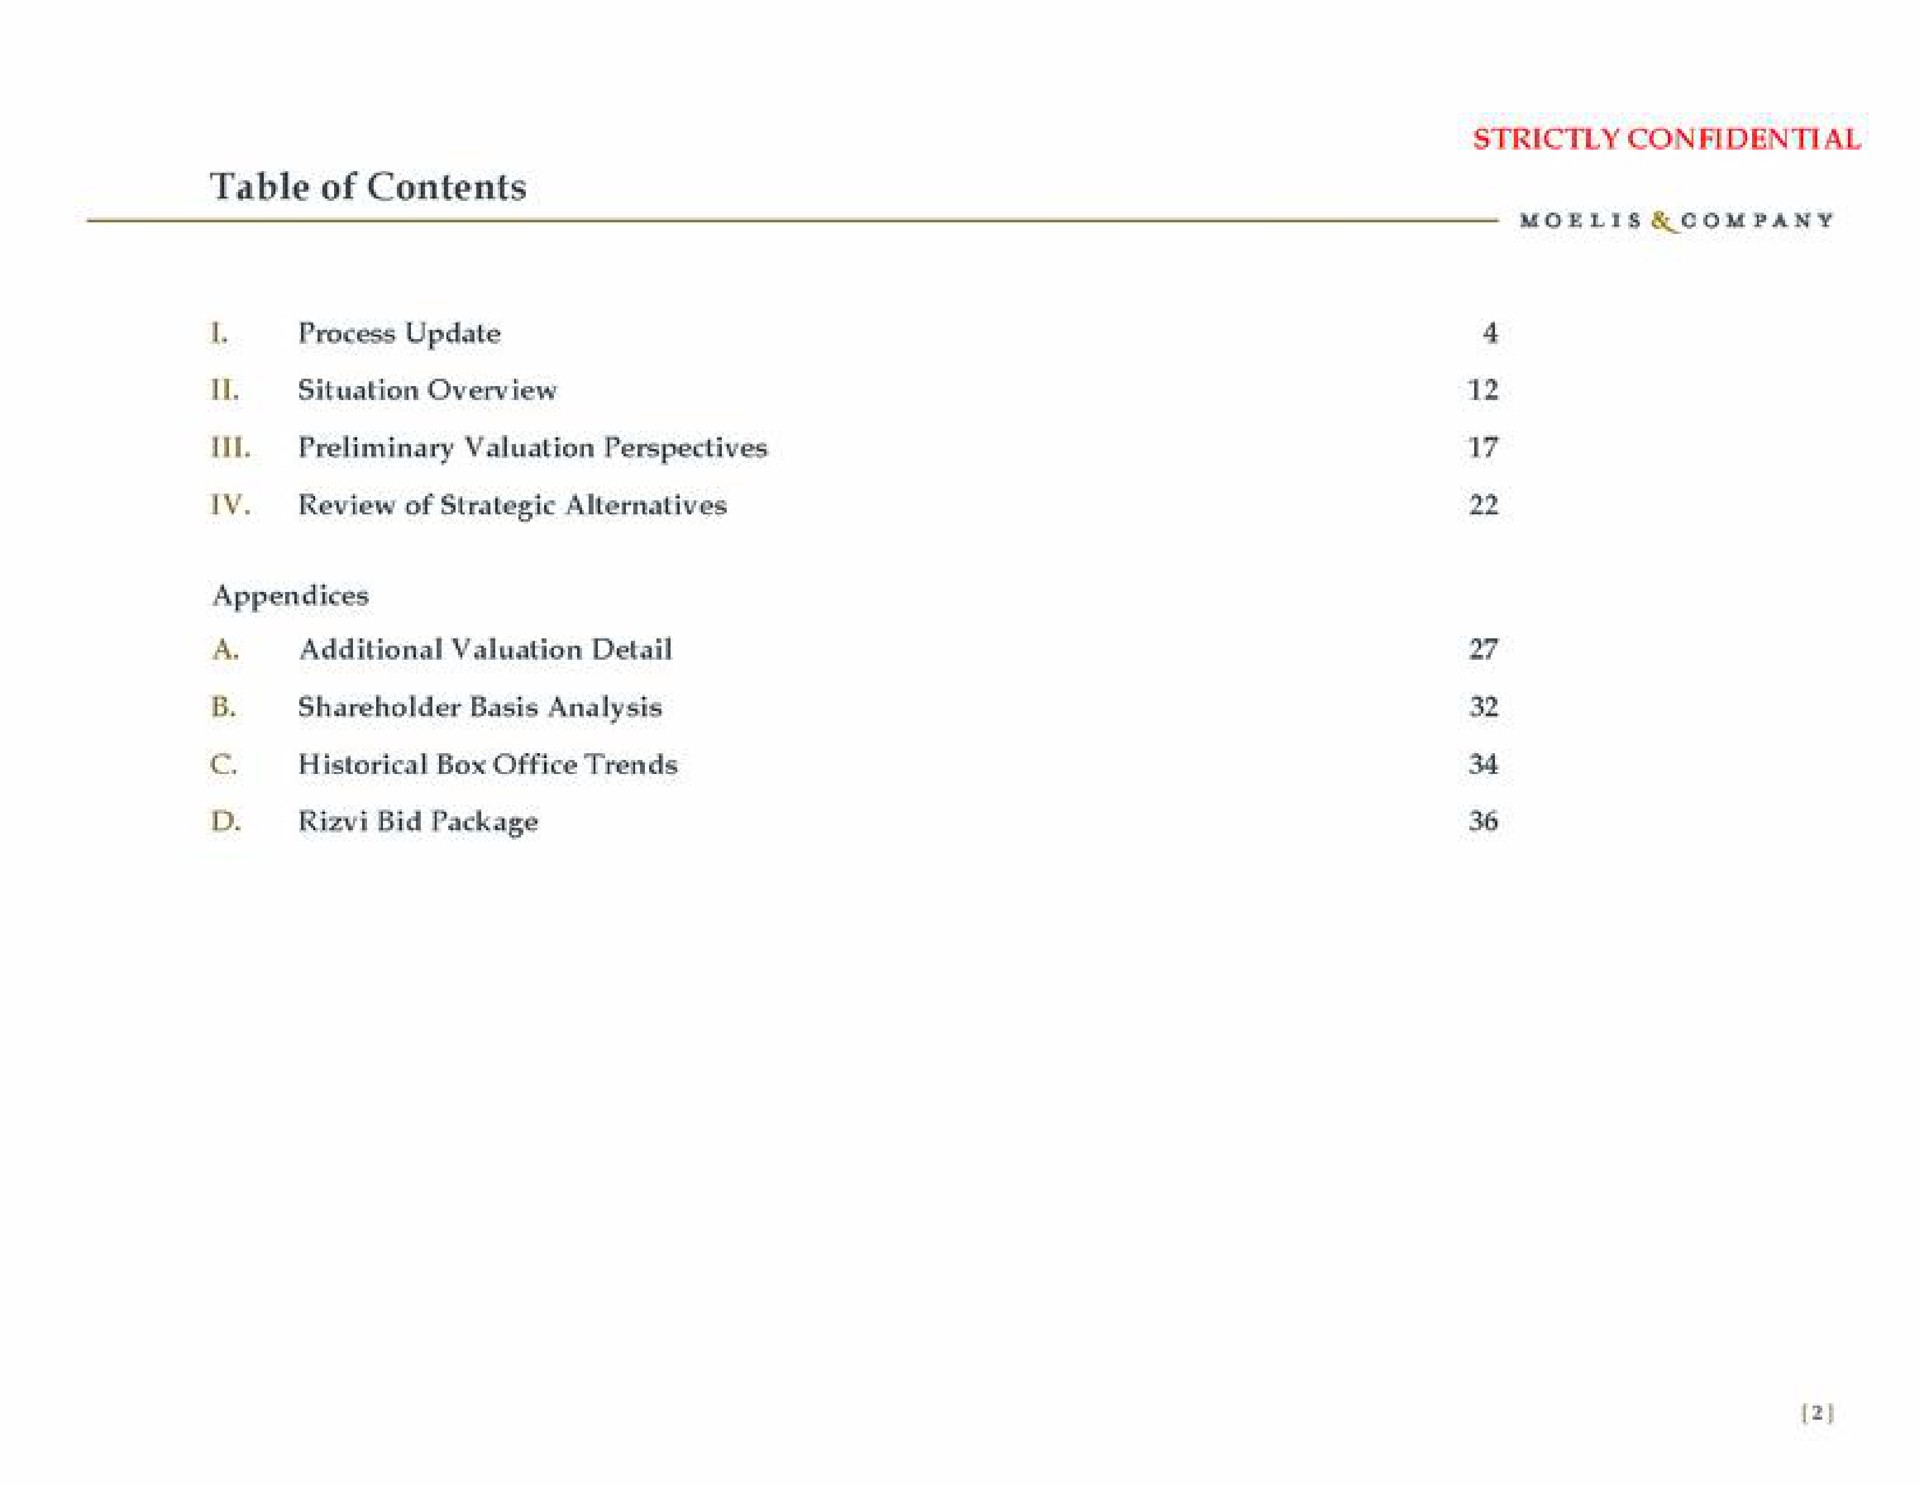 table of contents strictly confidential | Moelis & Company